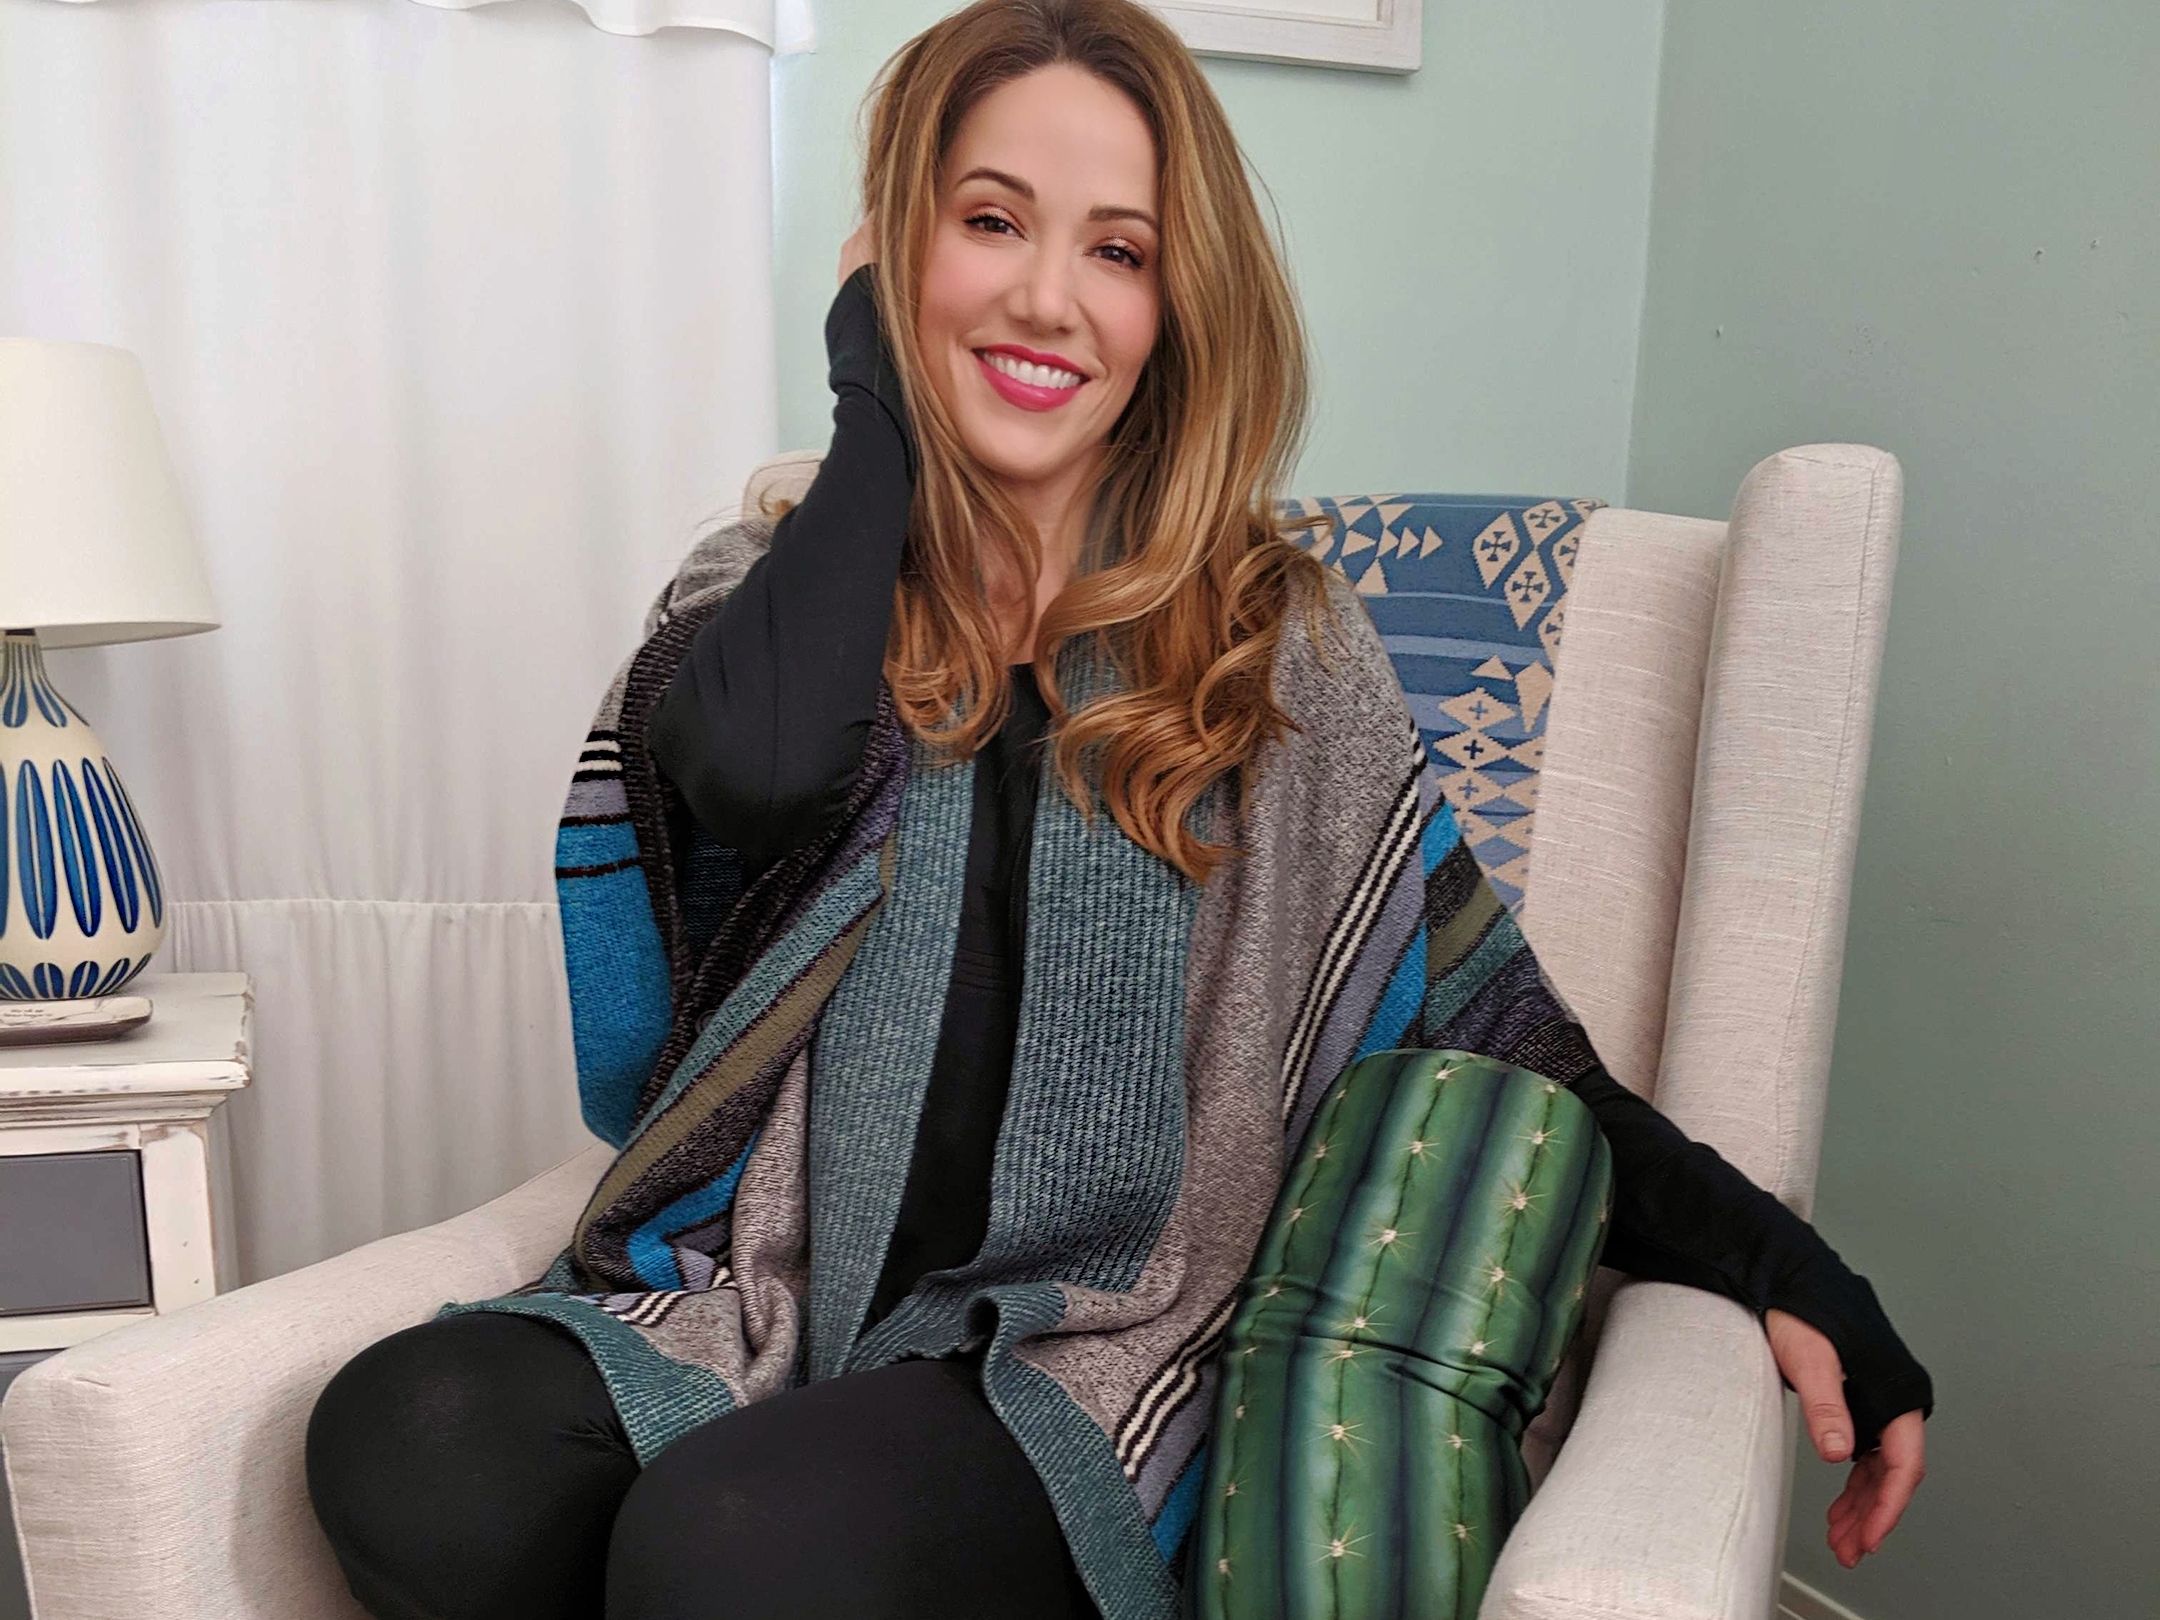 Spice Up Your Spring Wardrobe With Cabi Clothing - Stuart Says by Stuart  Brazell, Entertainment Reporter and Lifestyle Blogger